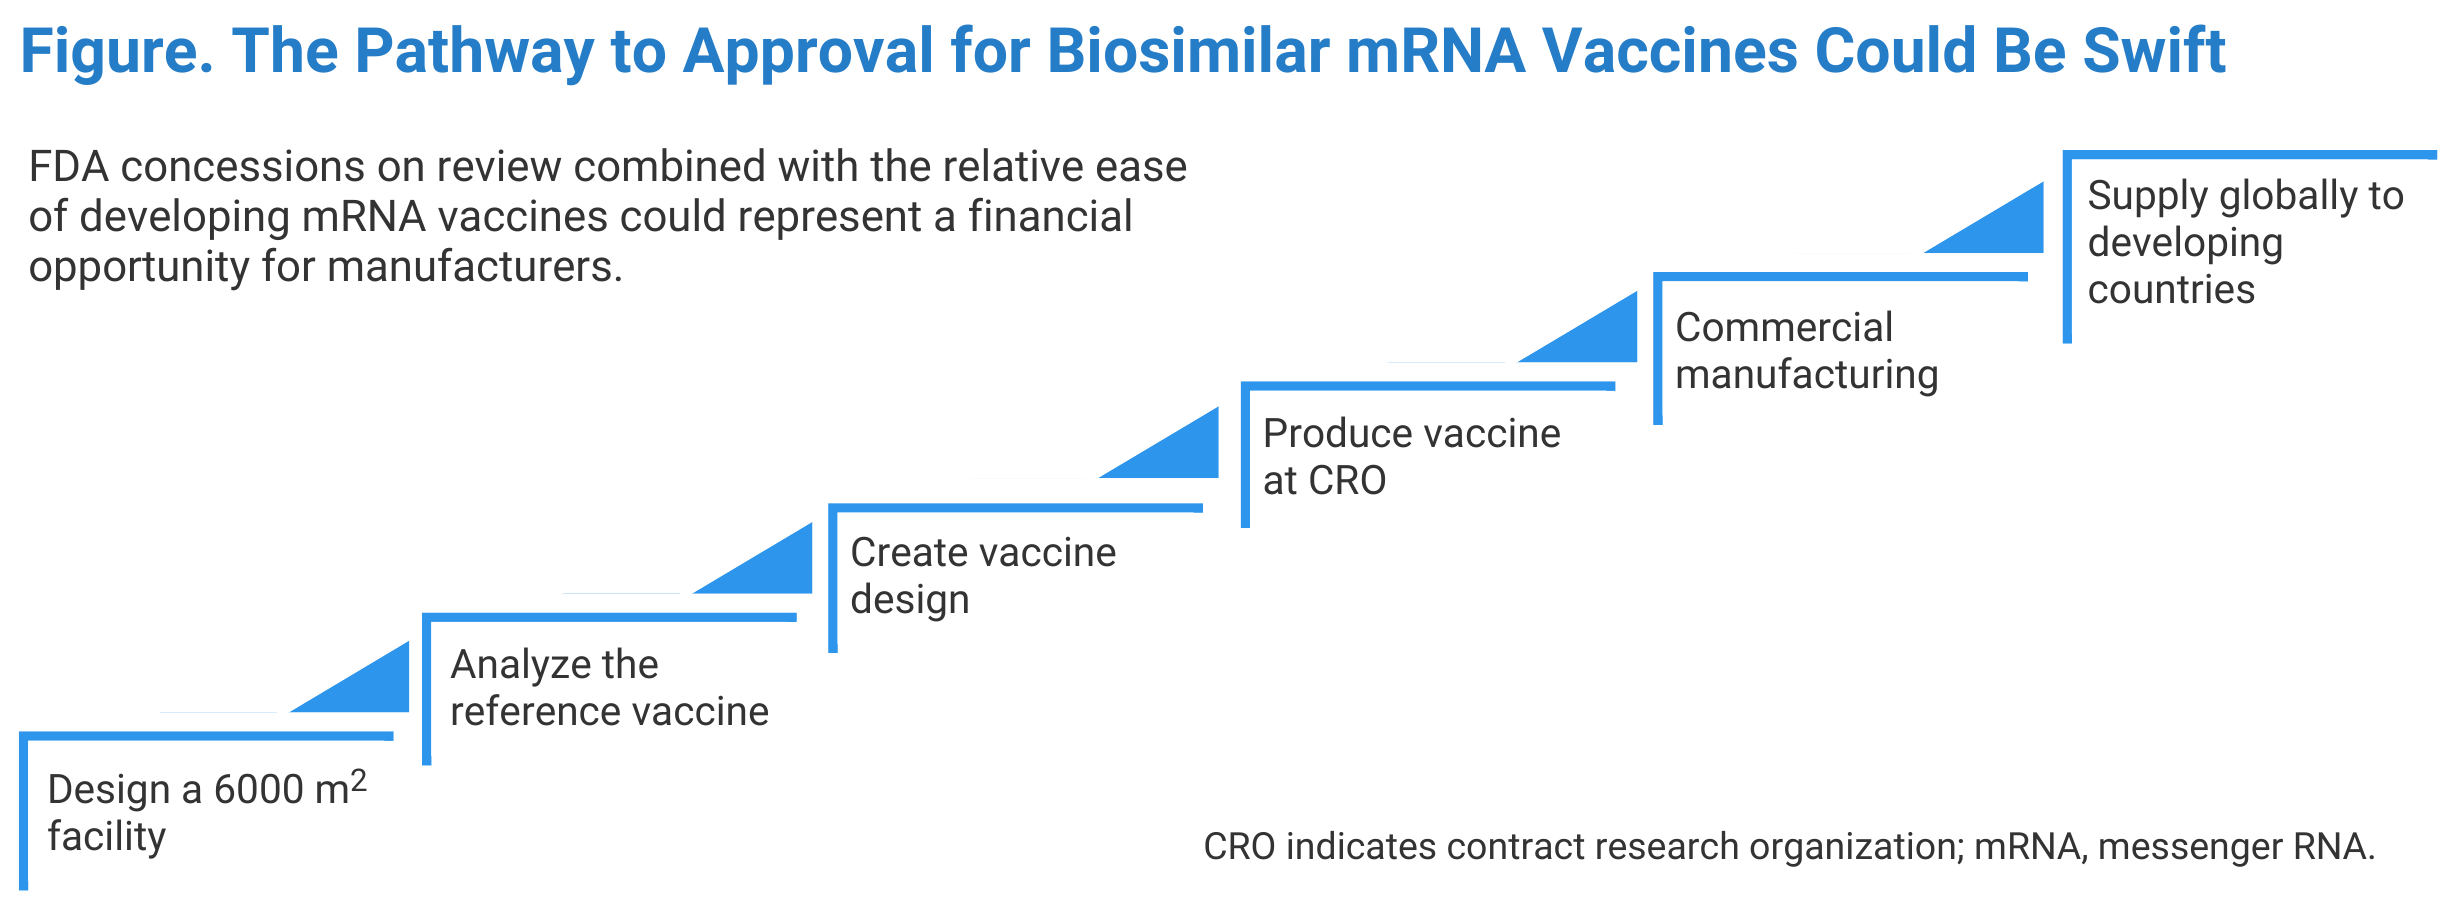 Figure. The Pathway to Approval for Biosimilar mRNA Vaccines Could Be Swift